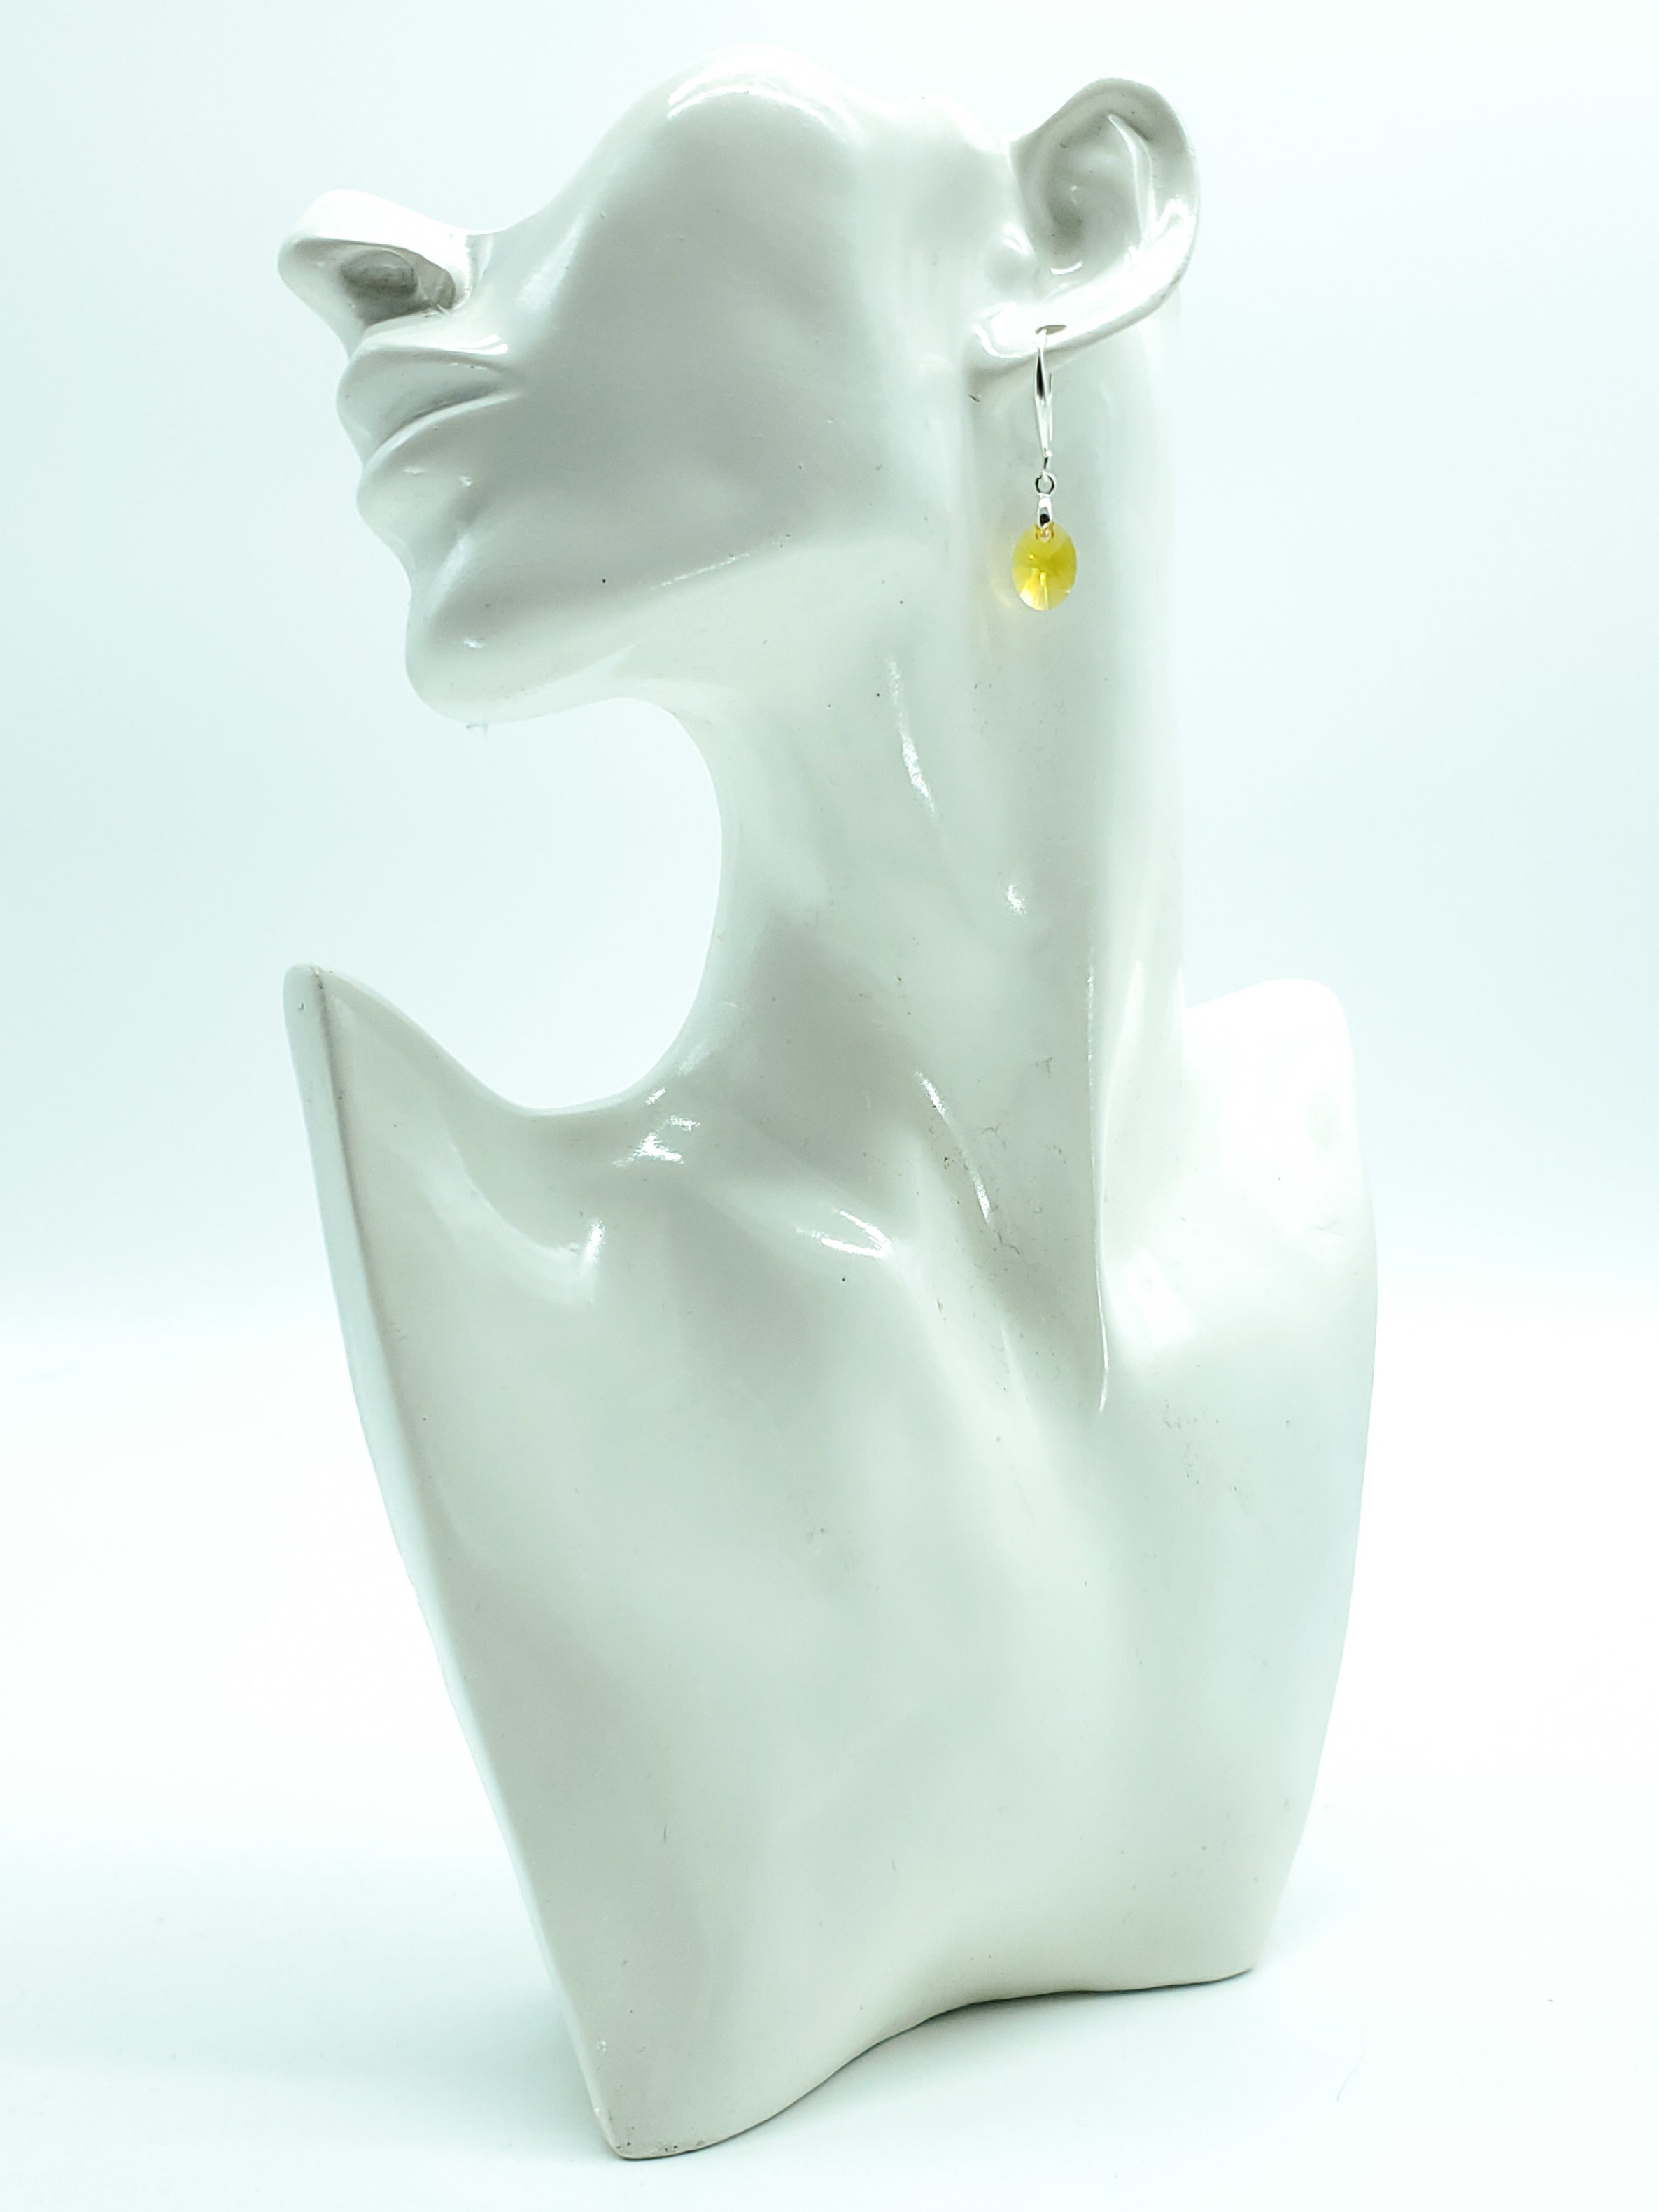 "Sunflower" OVAL SWAROVSKI CRYSTAL/STERLING SILVER EARRINGS - The Caffeinated Raven